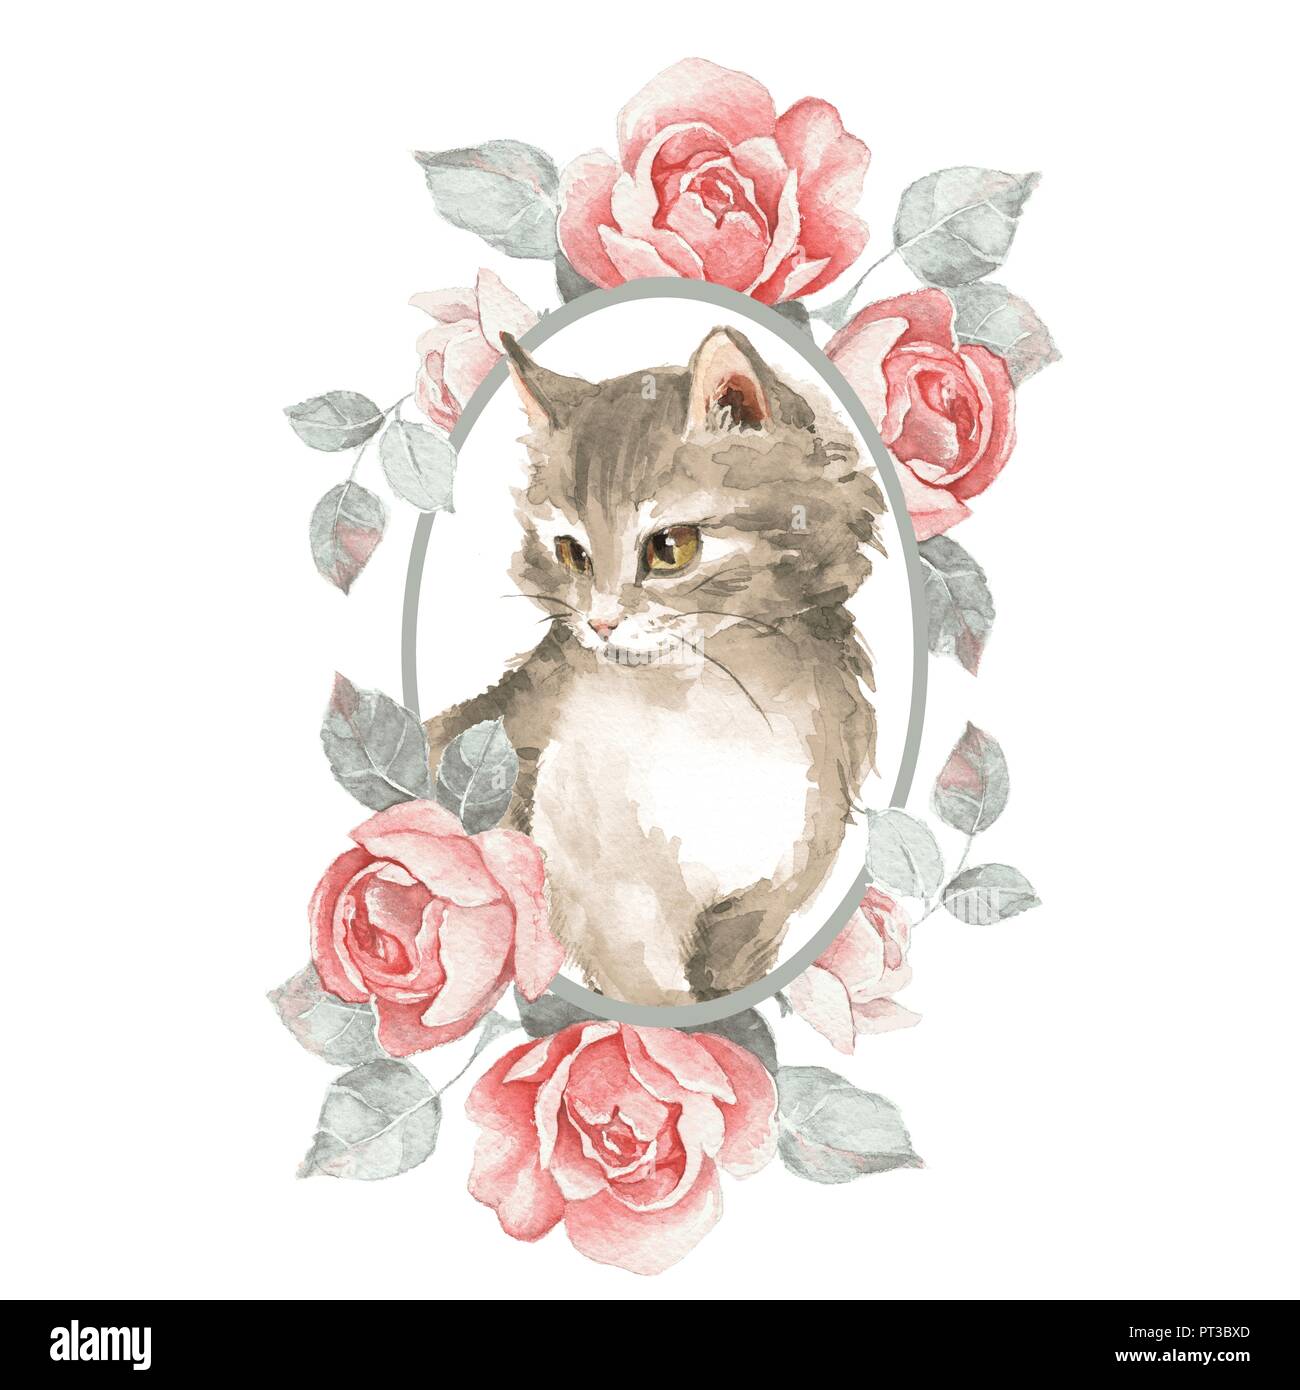 Cat. Cute kitten and roses. Watercolor illustration Stock Photo